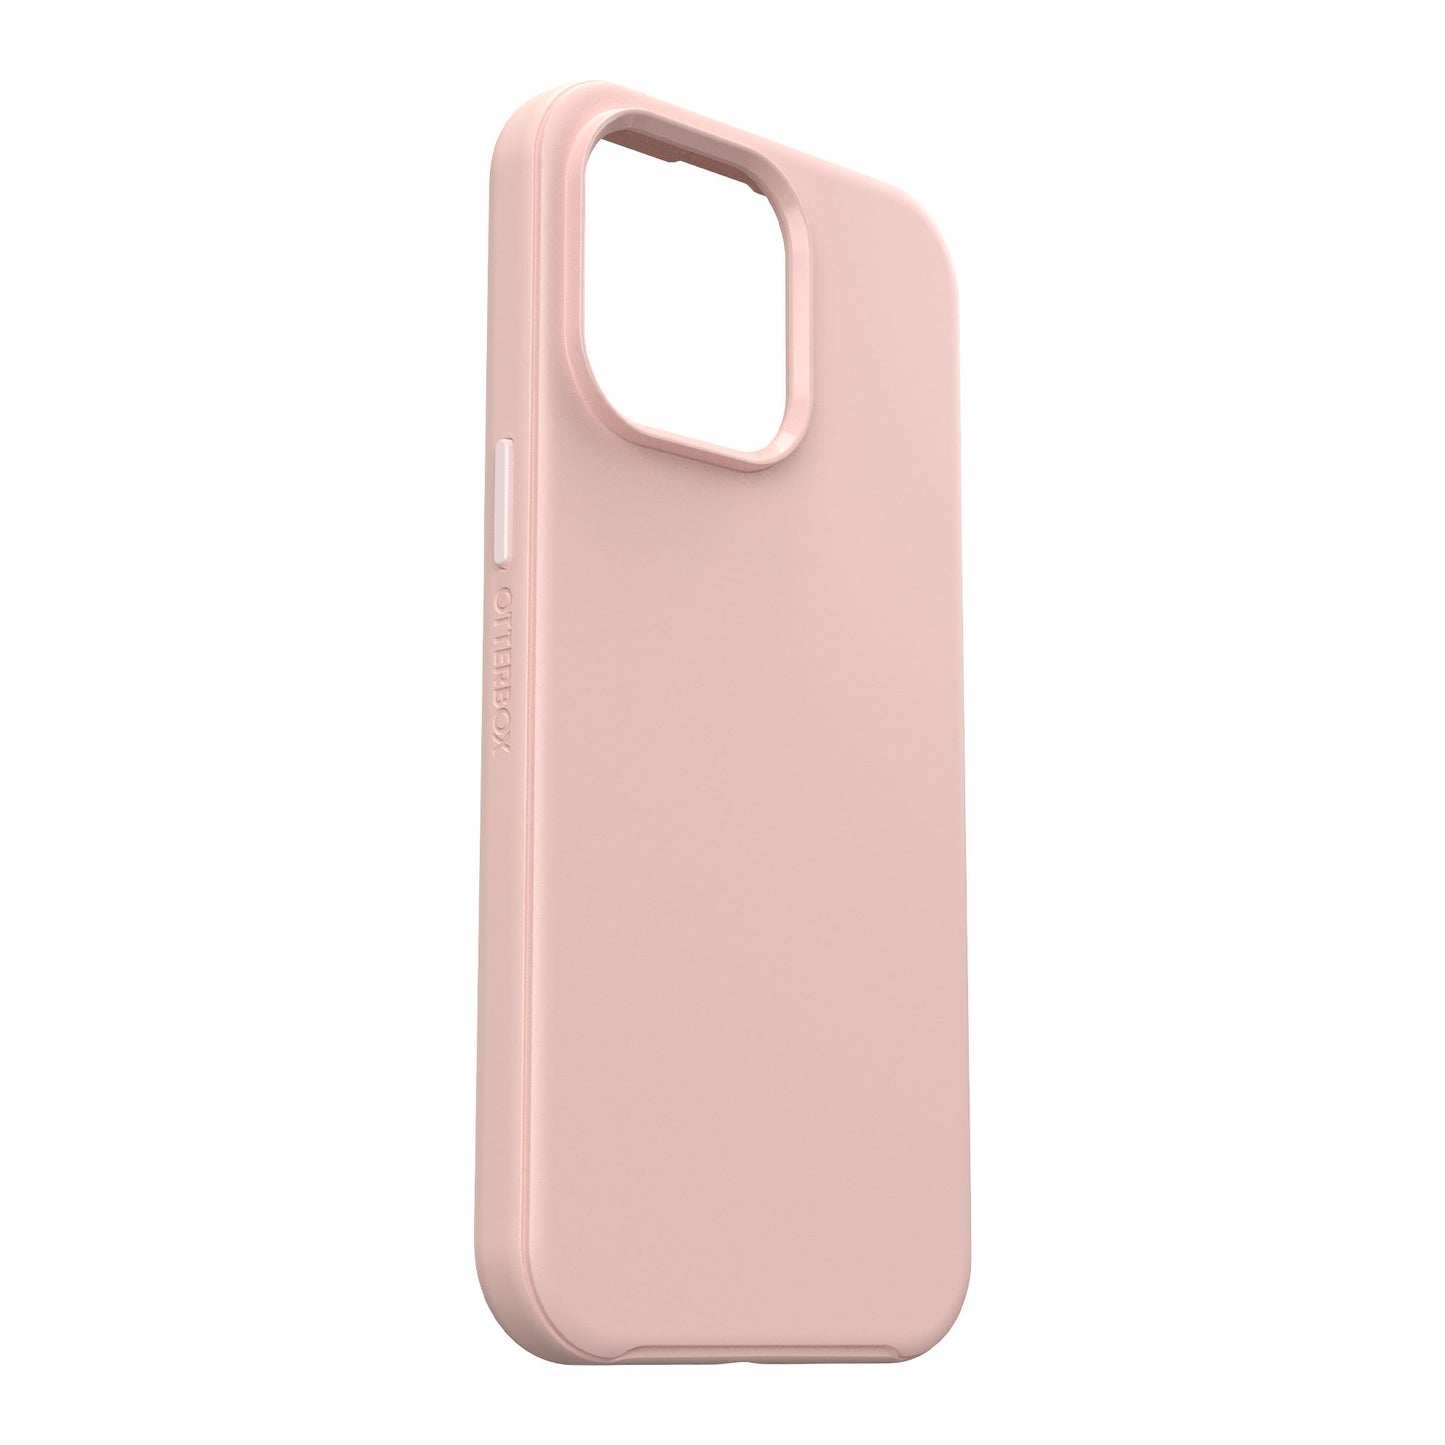 OTTERBOX Symmetry MagSafe Case for iPhone 15 Pro Max - Ballet Shoes